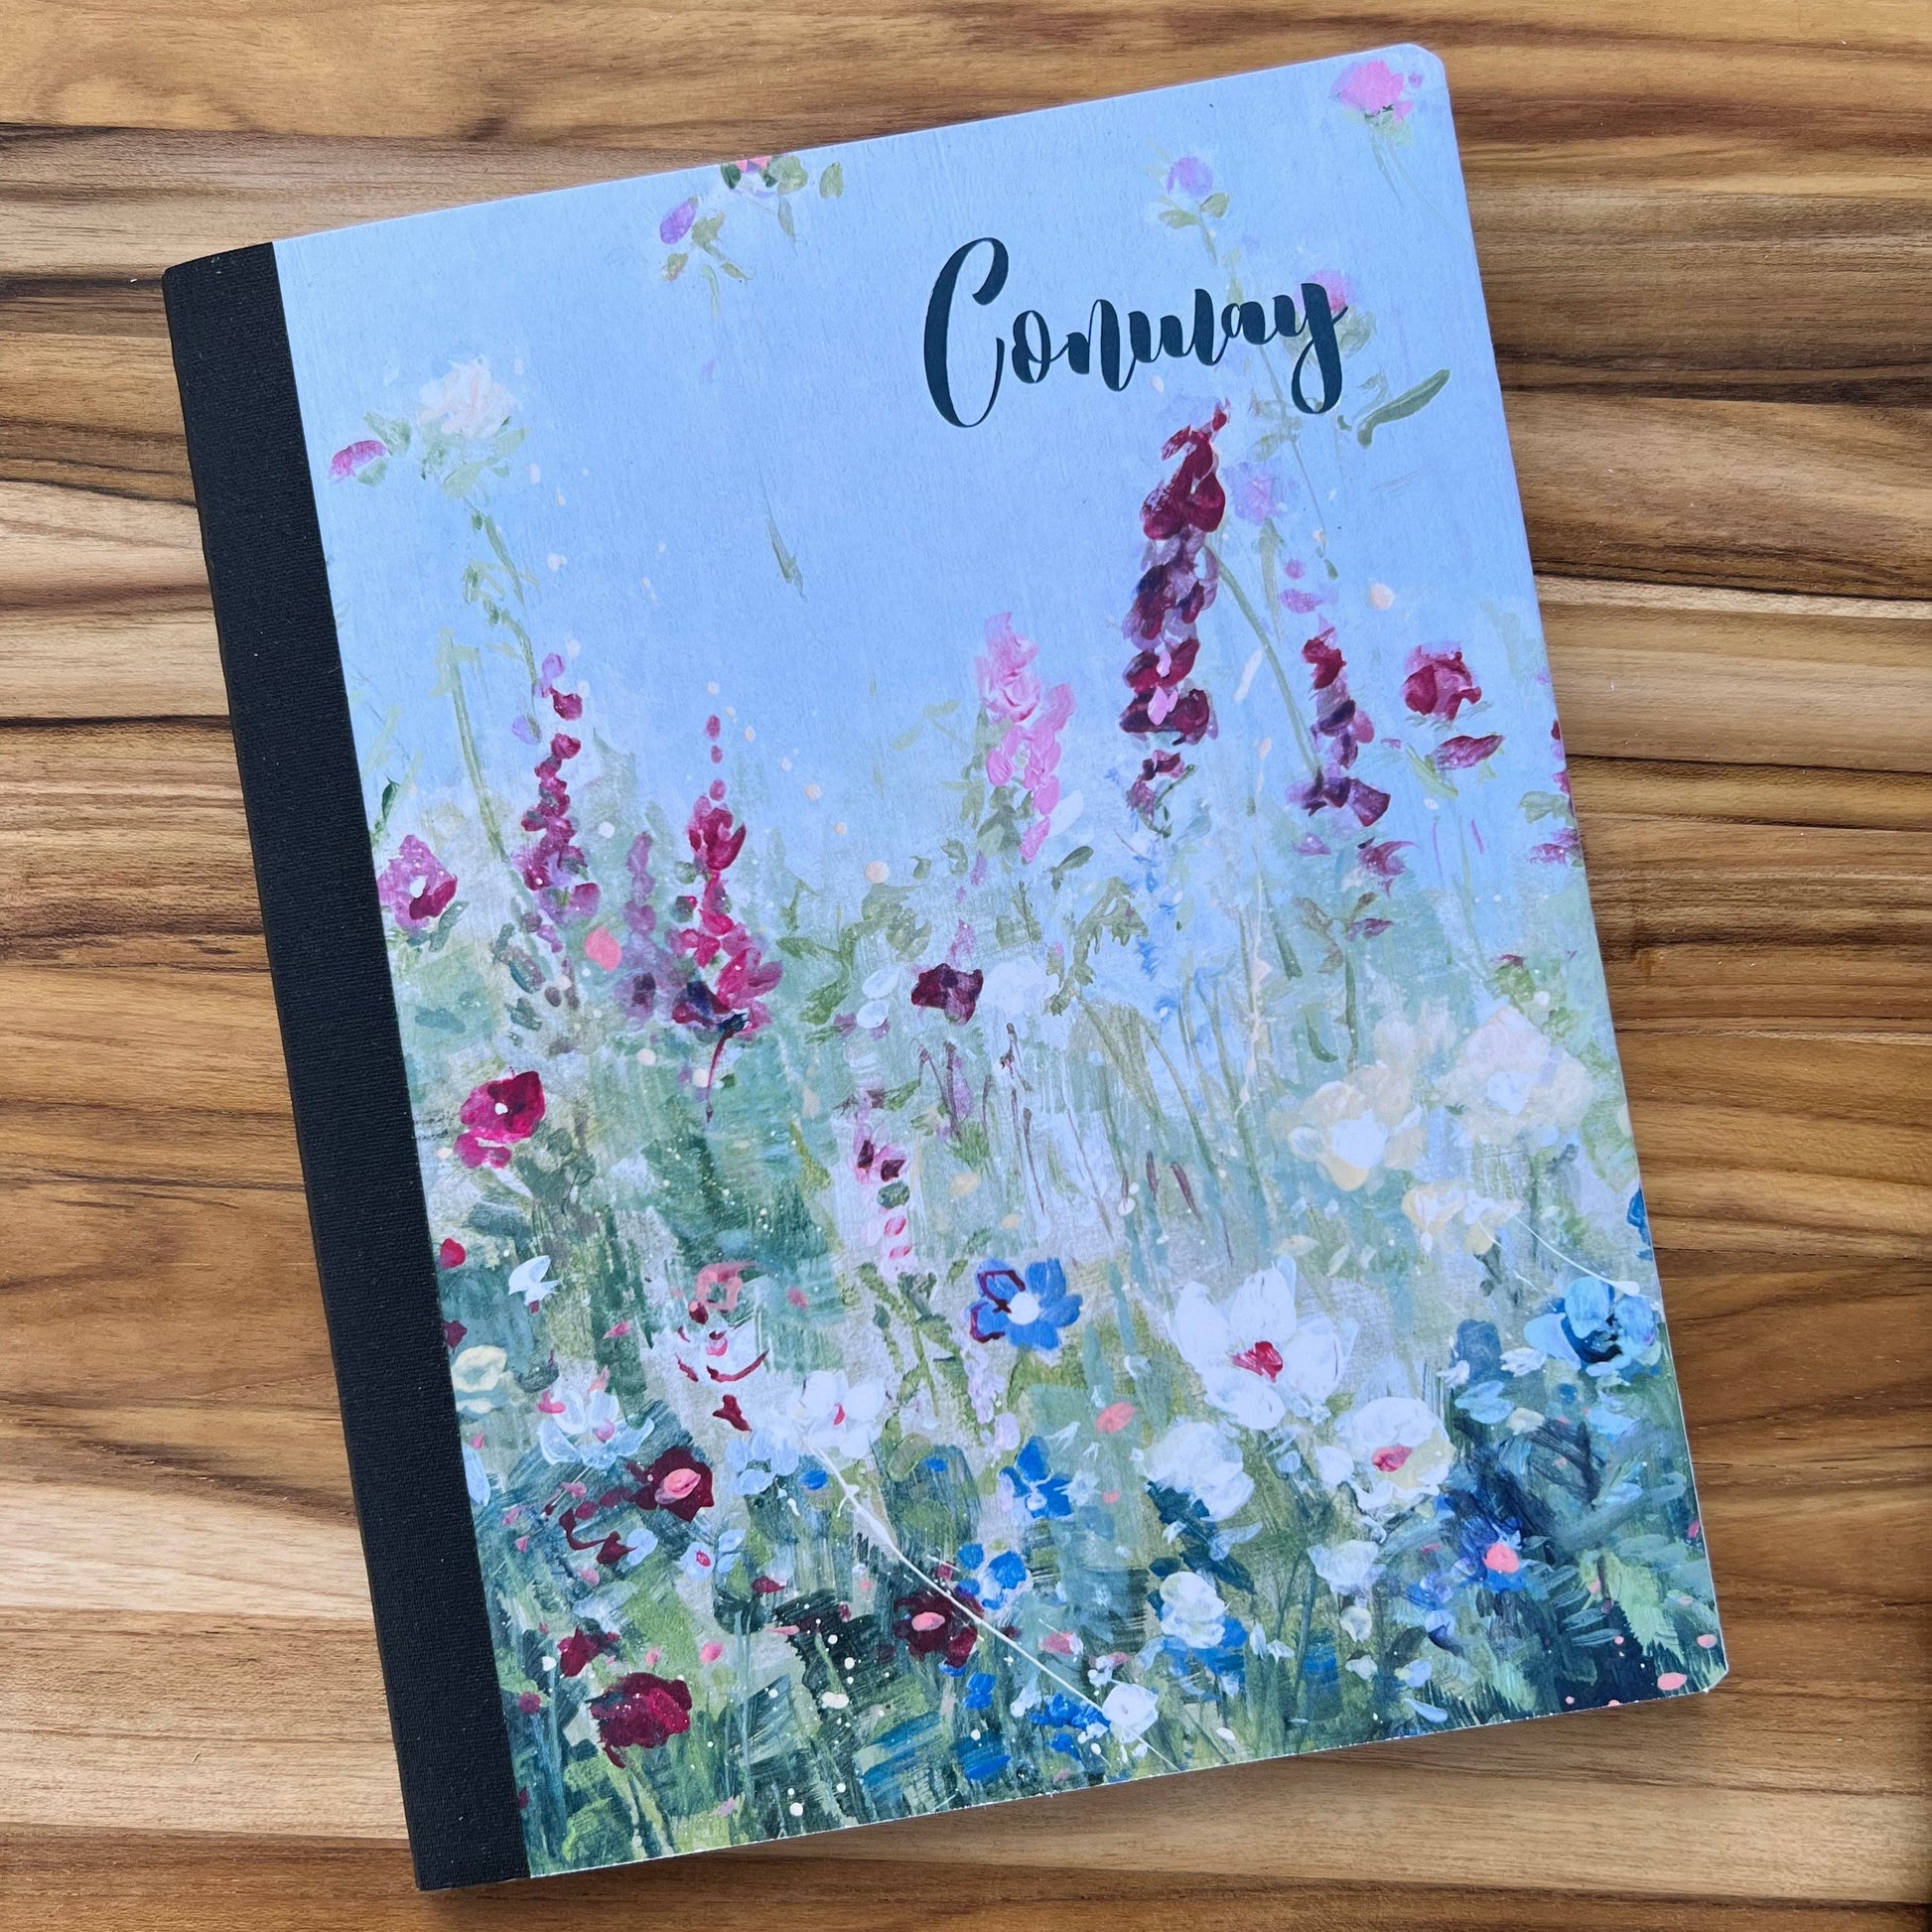 blue notebook with wildflowers design and "conway" printed on the cover.